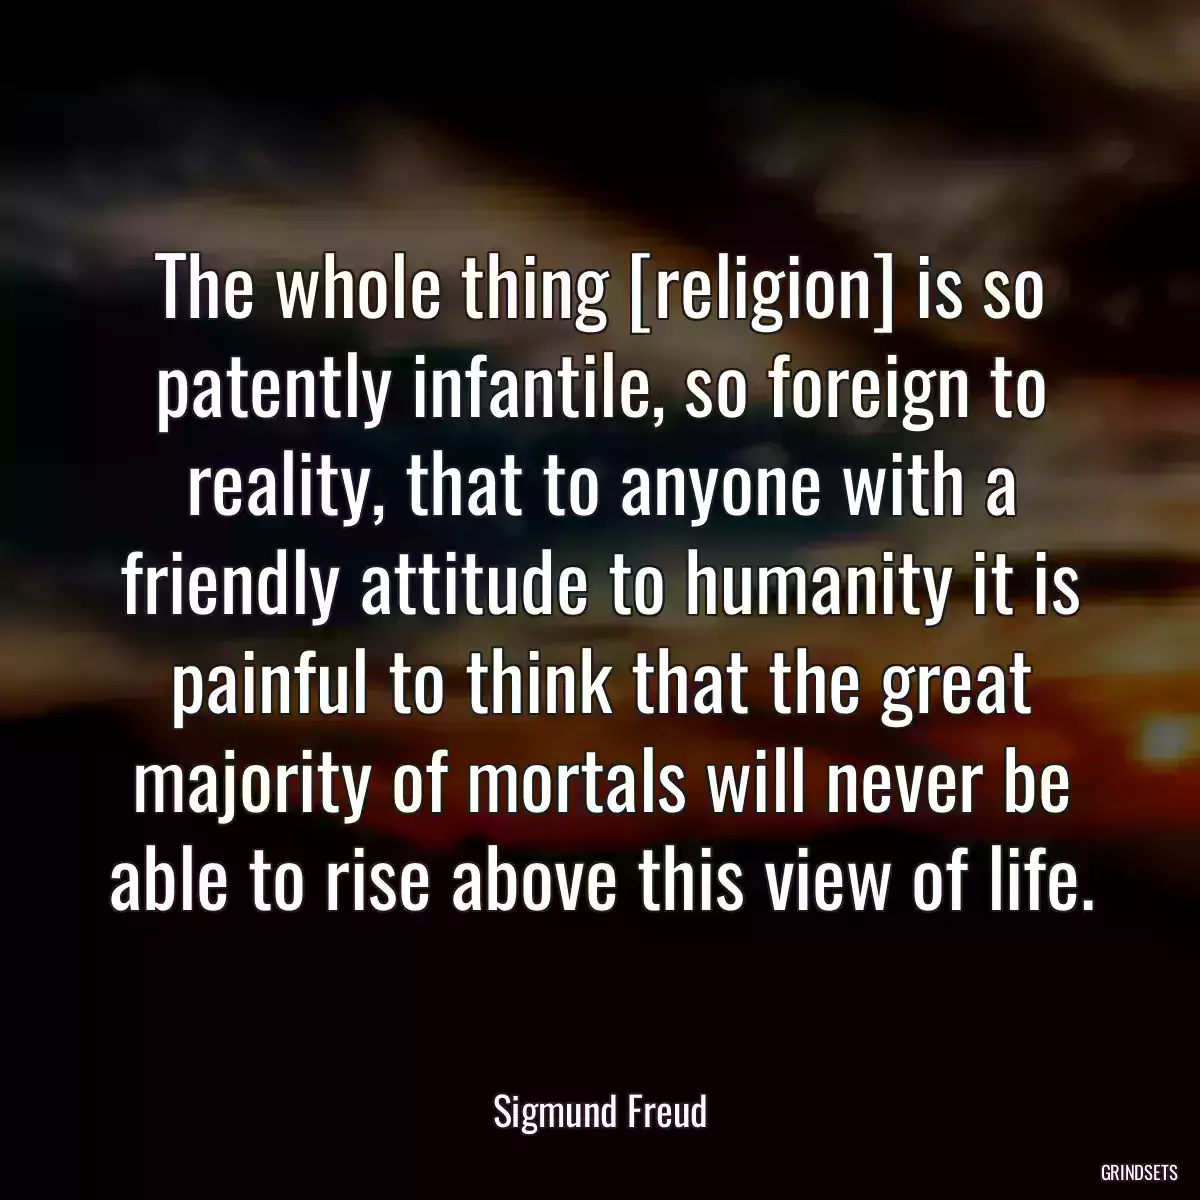 The whole thing [religion] is so patently infantile, so foreign to reality, that to anyone with a friendly attitude to humanity it is painful to think that the great majority of mortals will never be able to rise above this view of life.